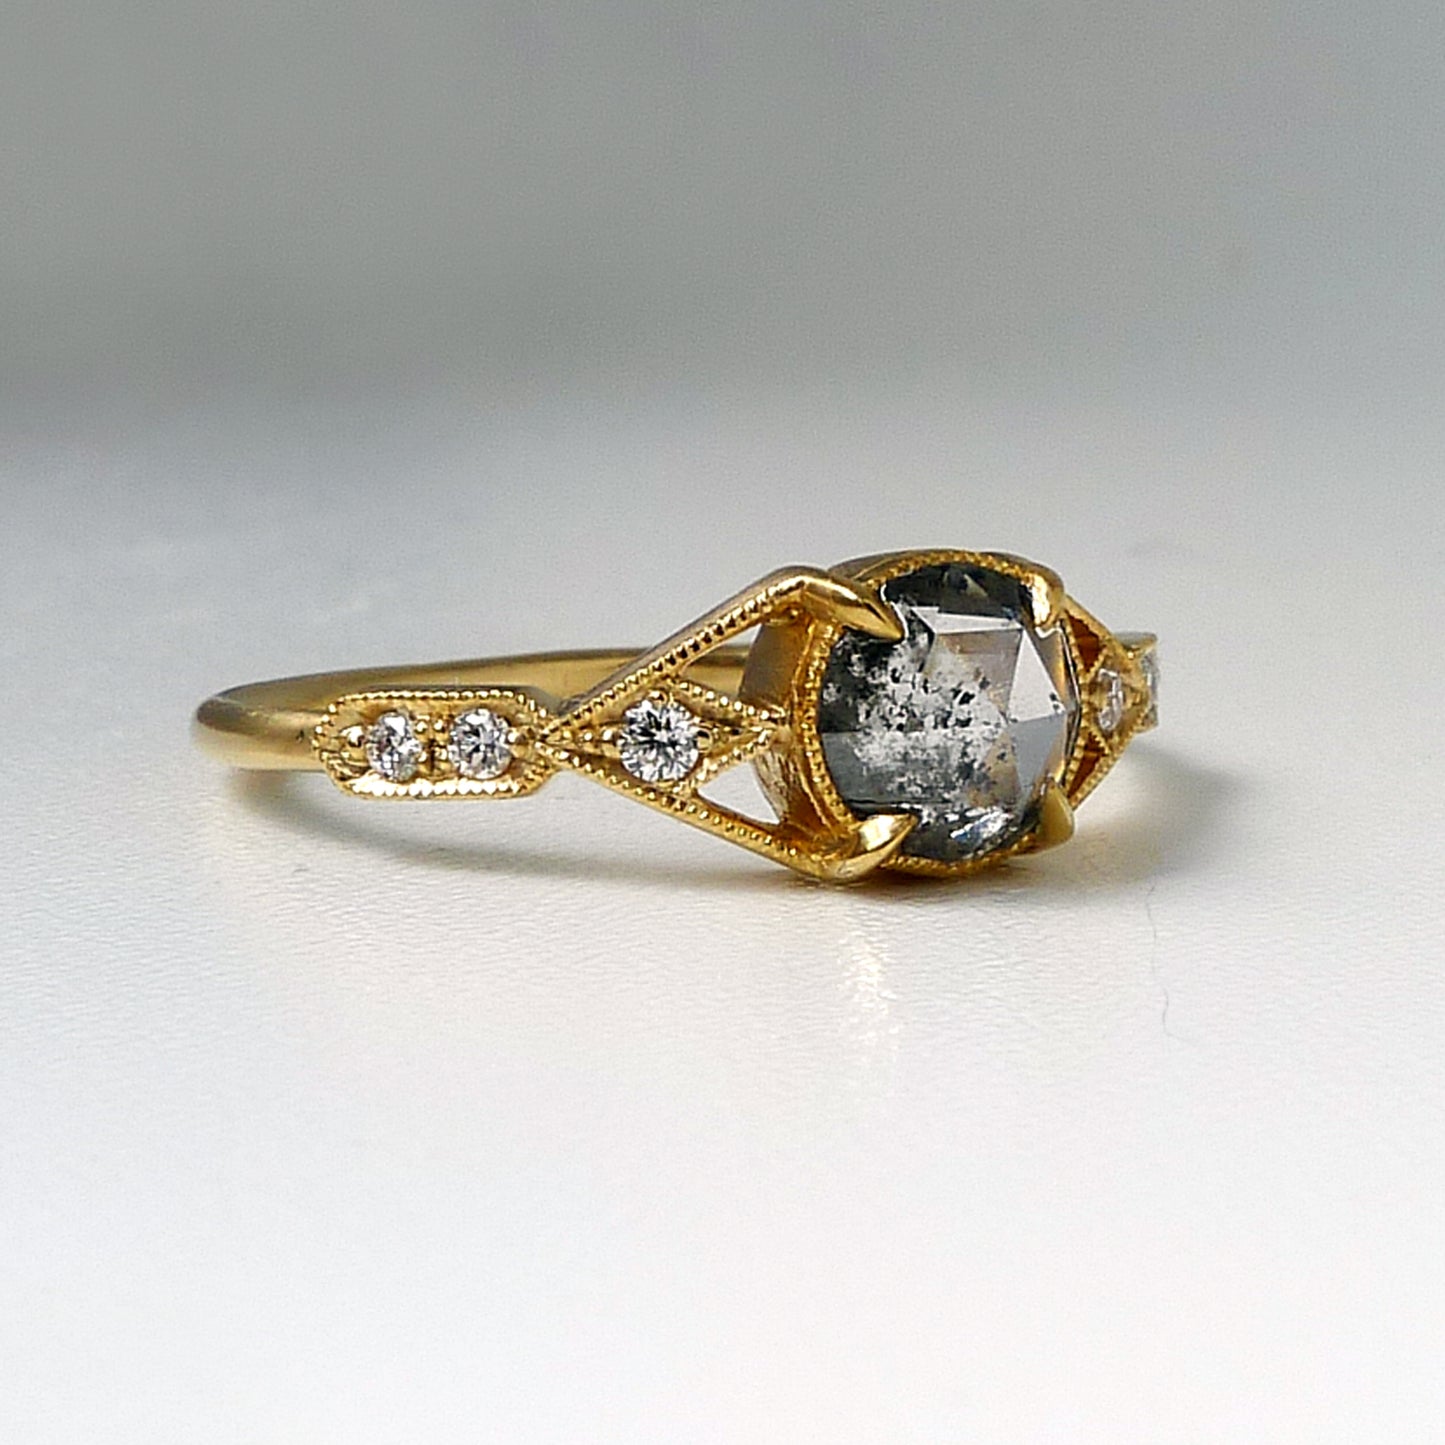 Aestas Ring with Salt and Pepper Diamond